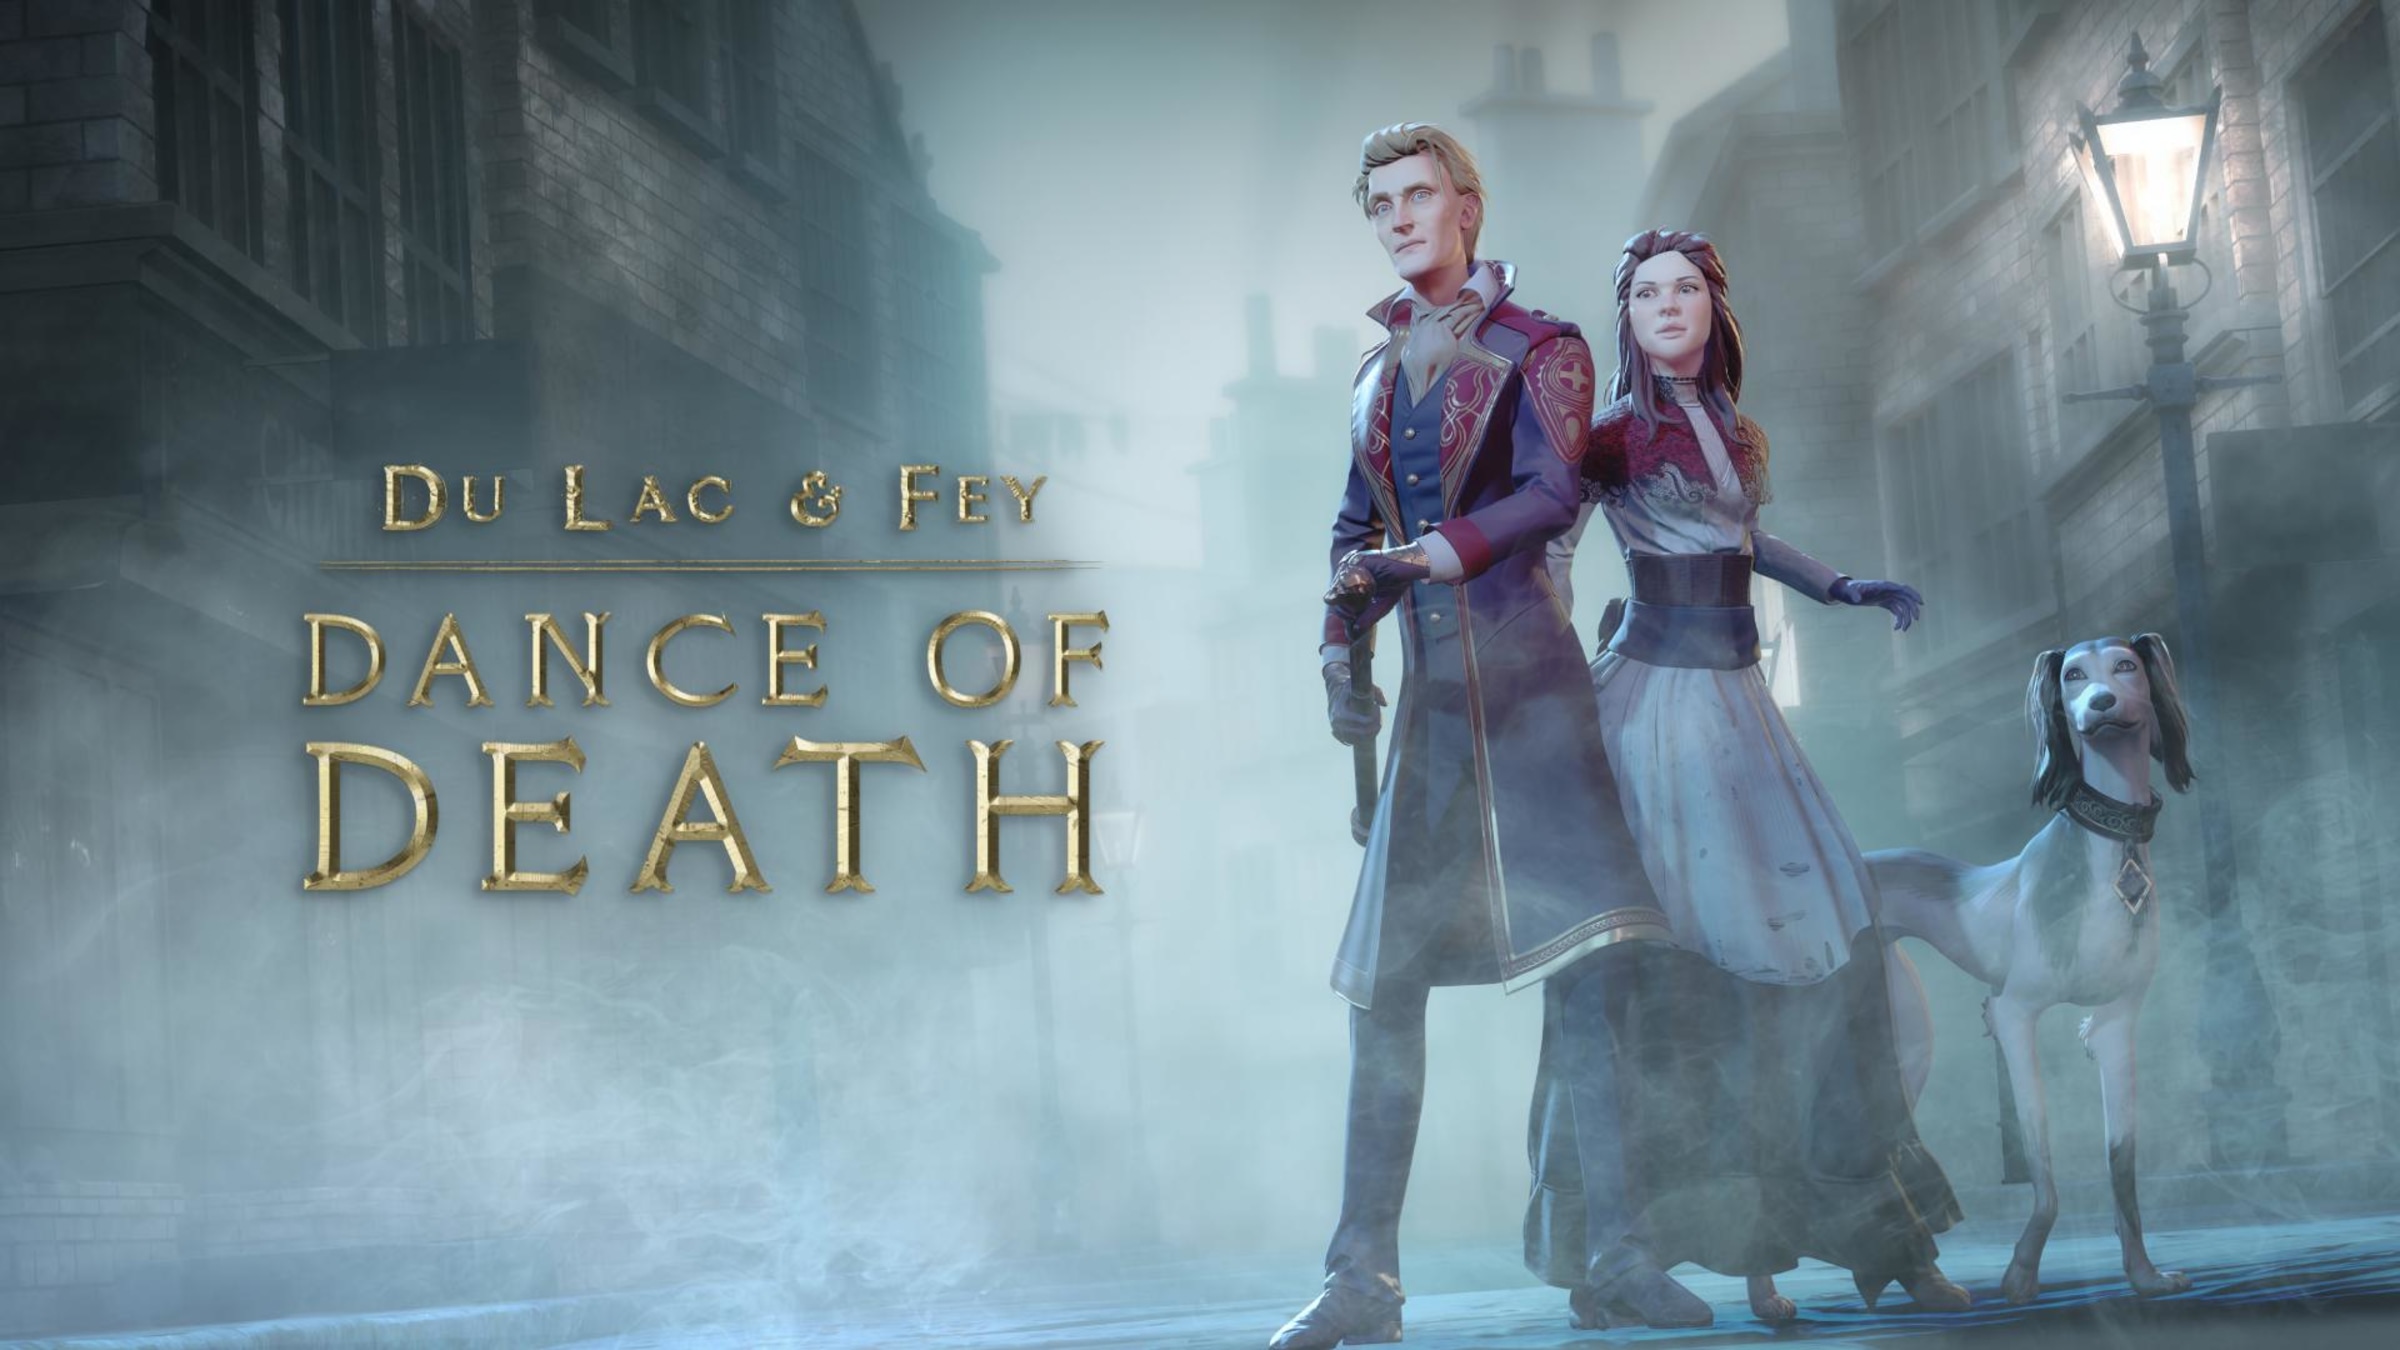 dance-of-death-du-lac-fey-for-nintendo-switch-nintendo-official-site